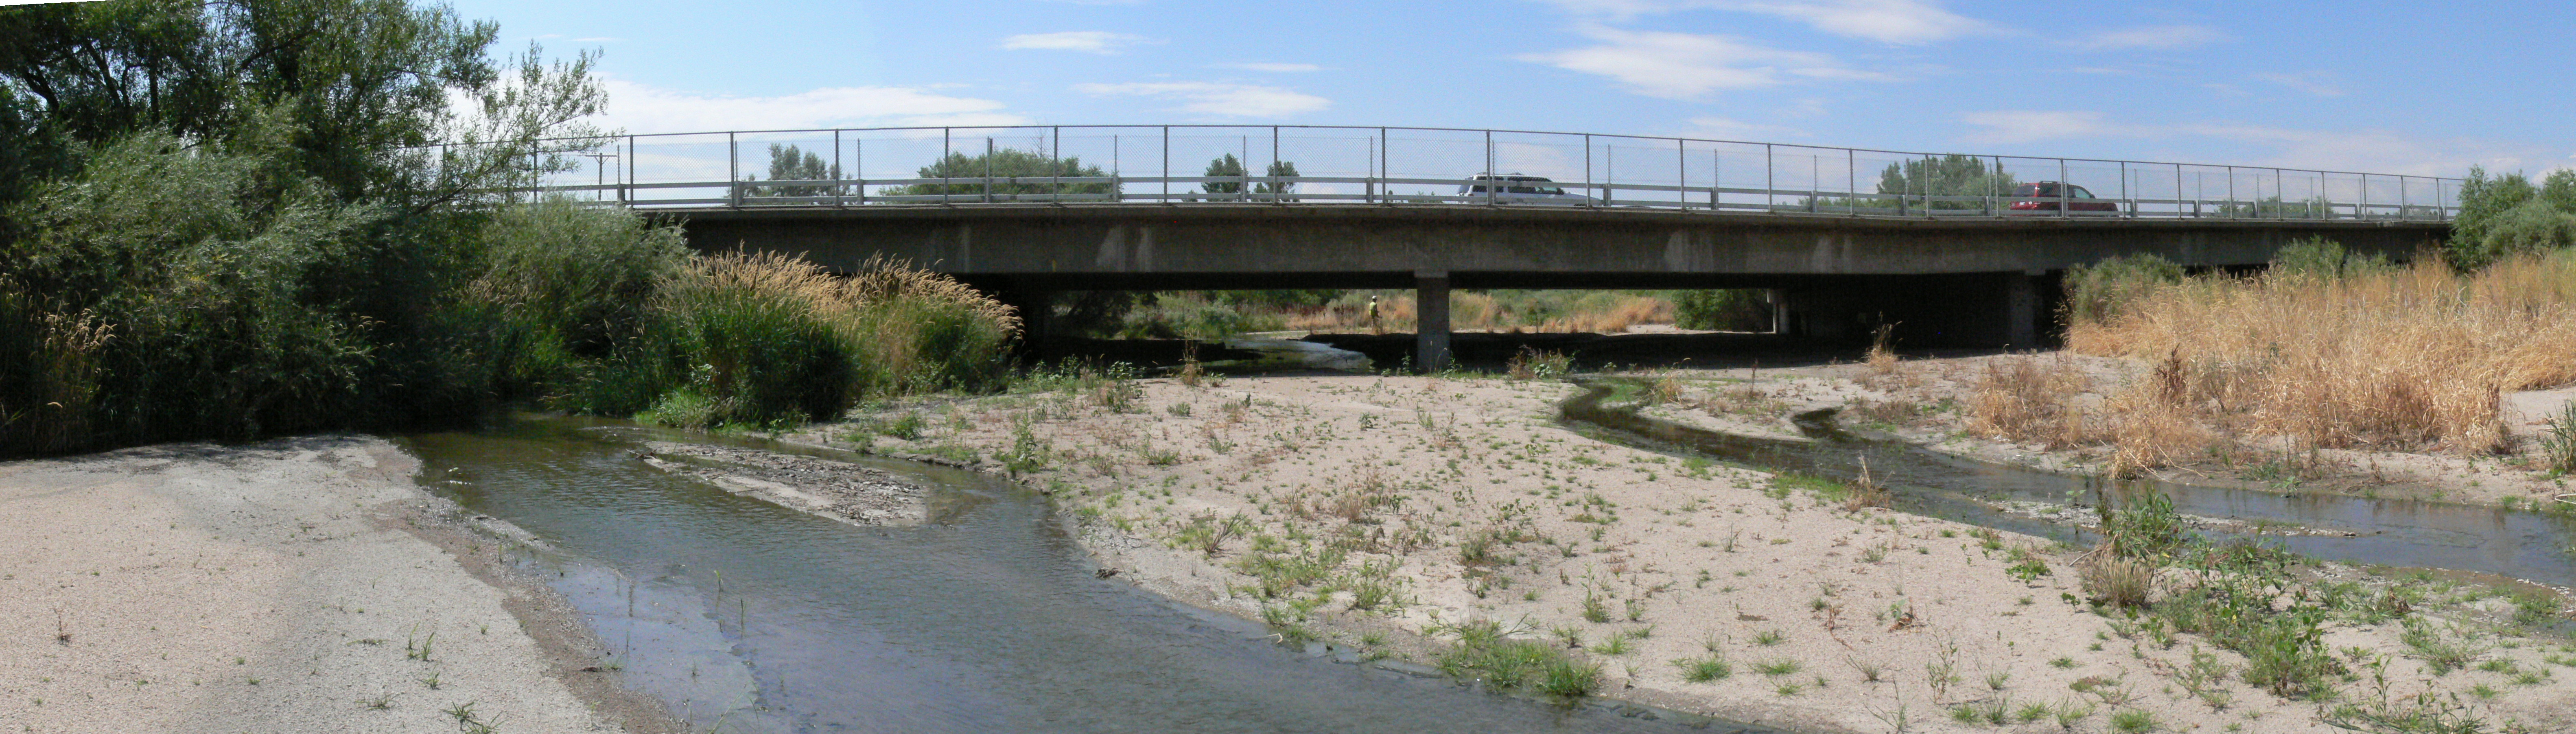 SH88- Arapahoe Rd. over Cherry Creek. West of Sh-83 detail image